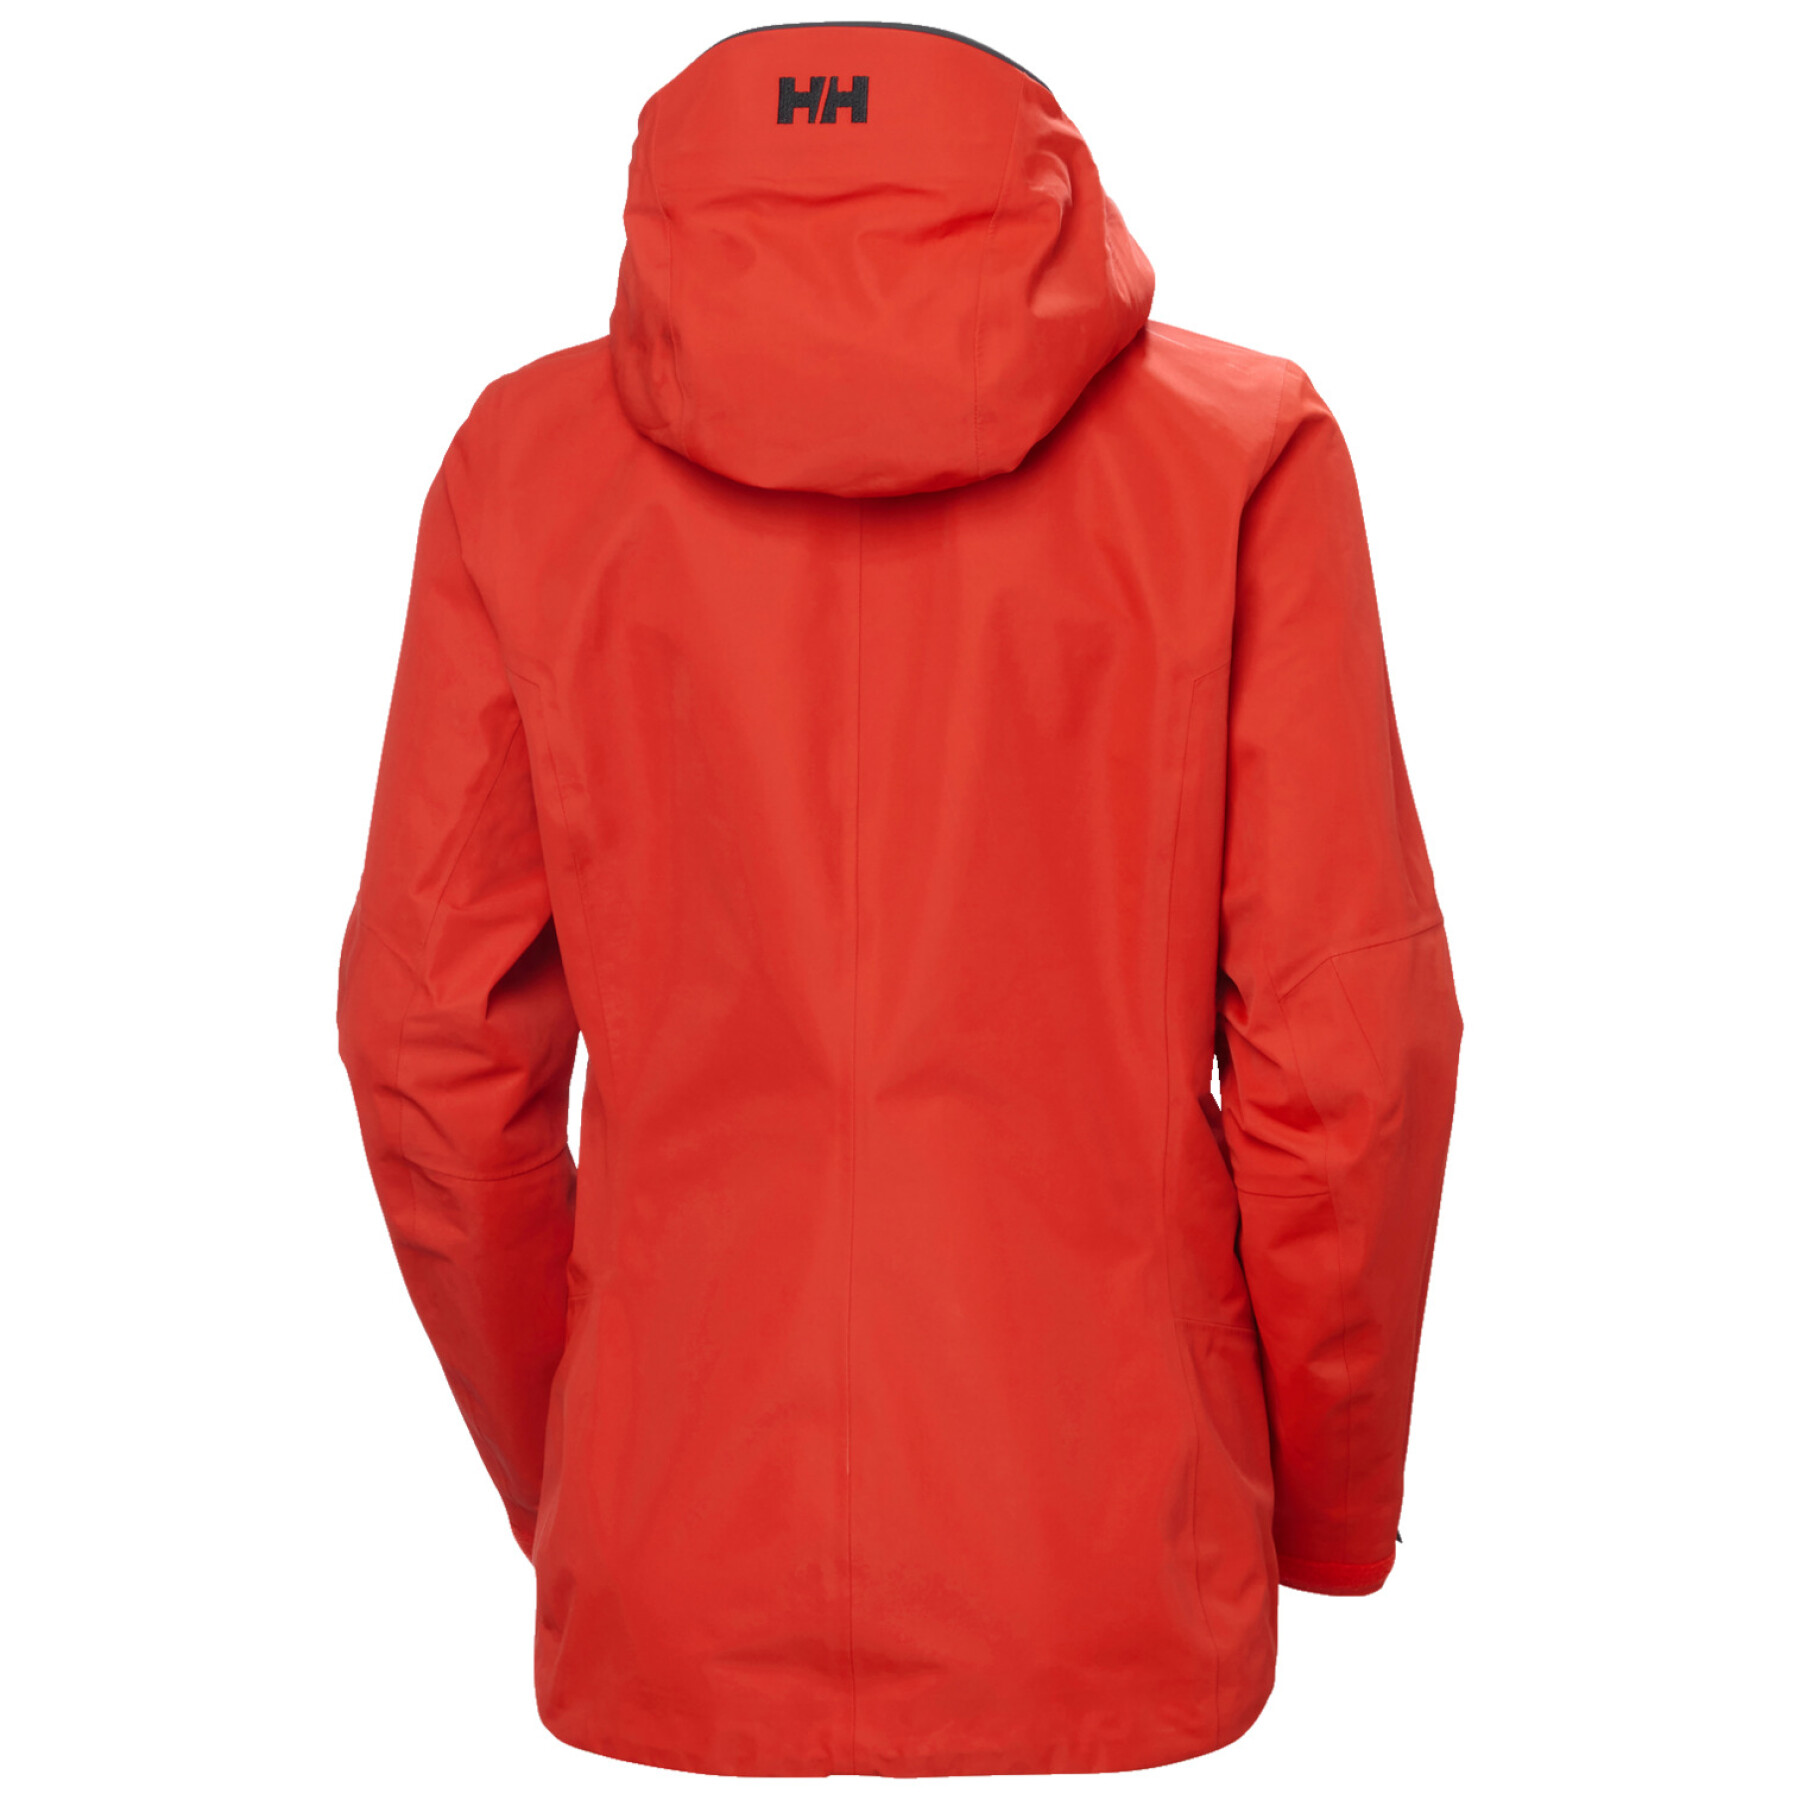 Chaqueta impermeable mujer Helly Hansen Odin 9 World Inf Shell